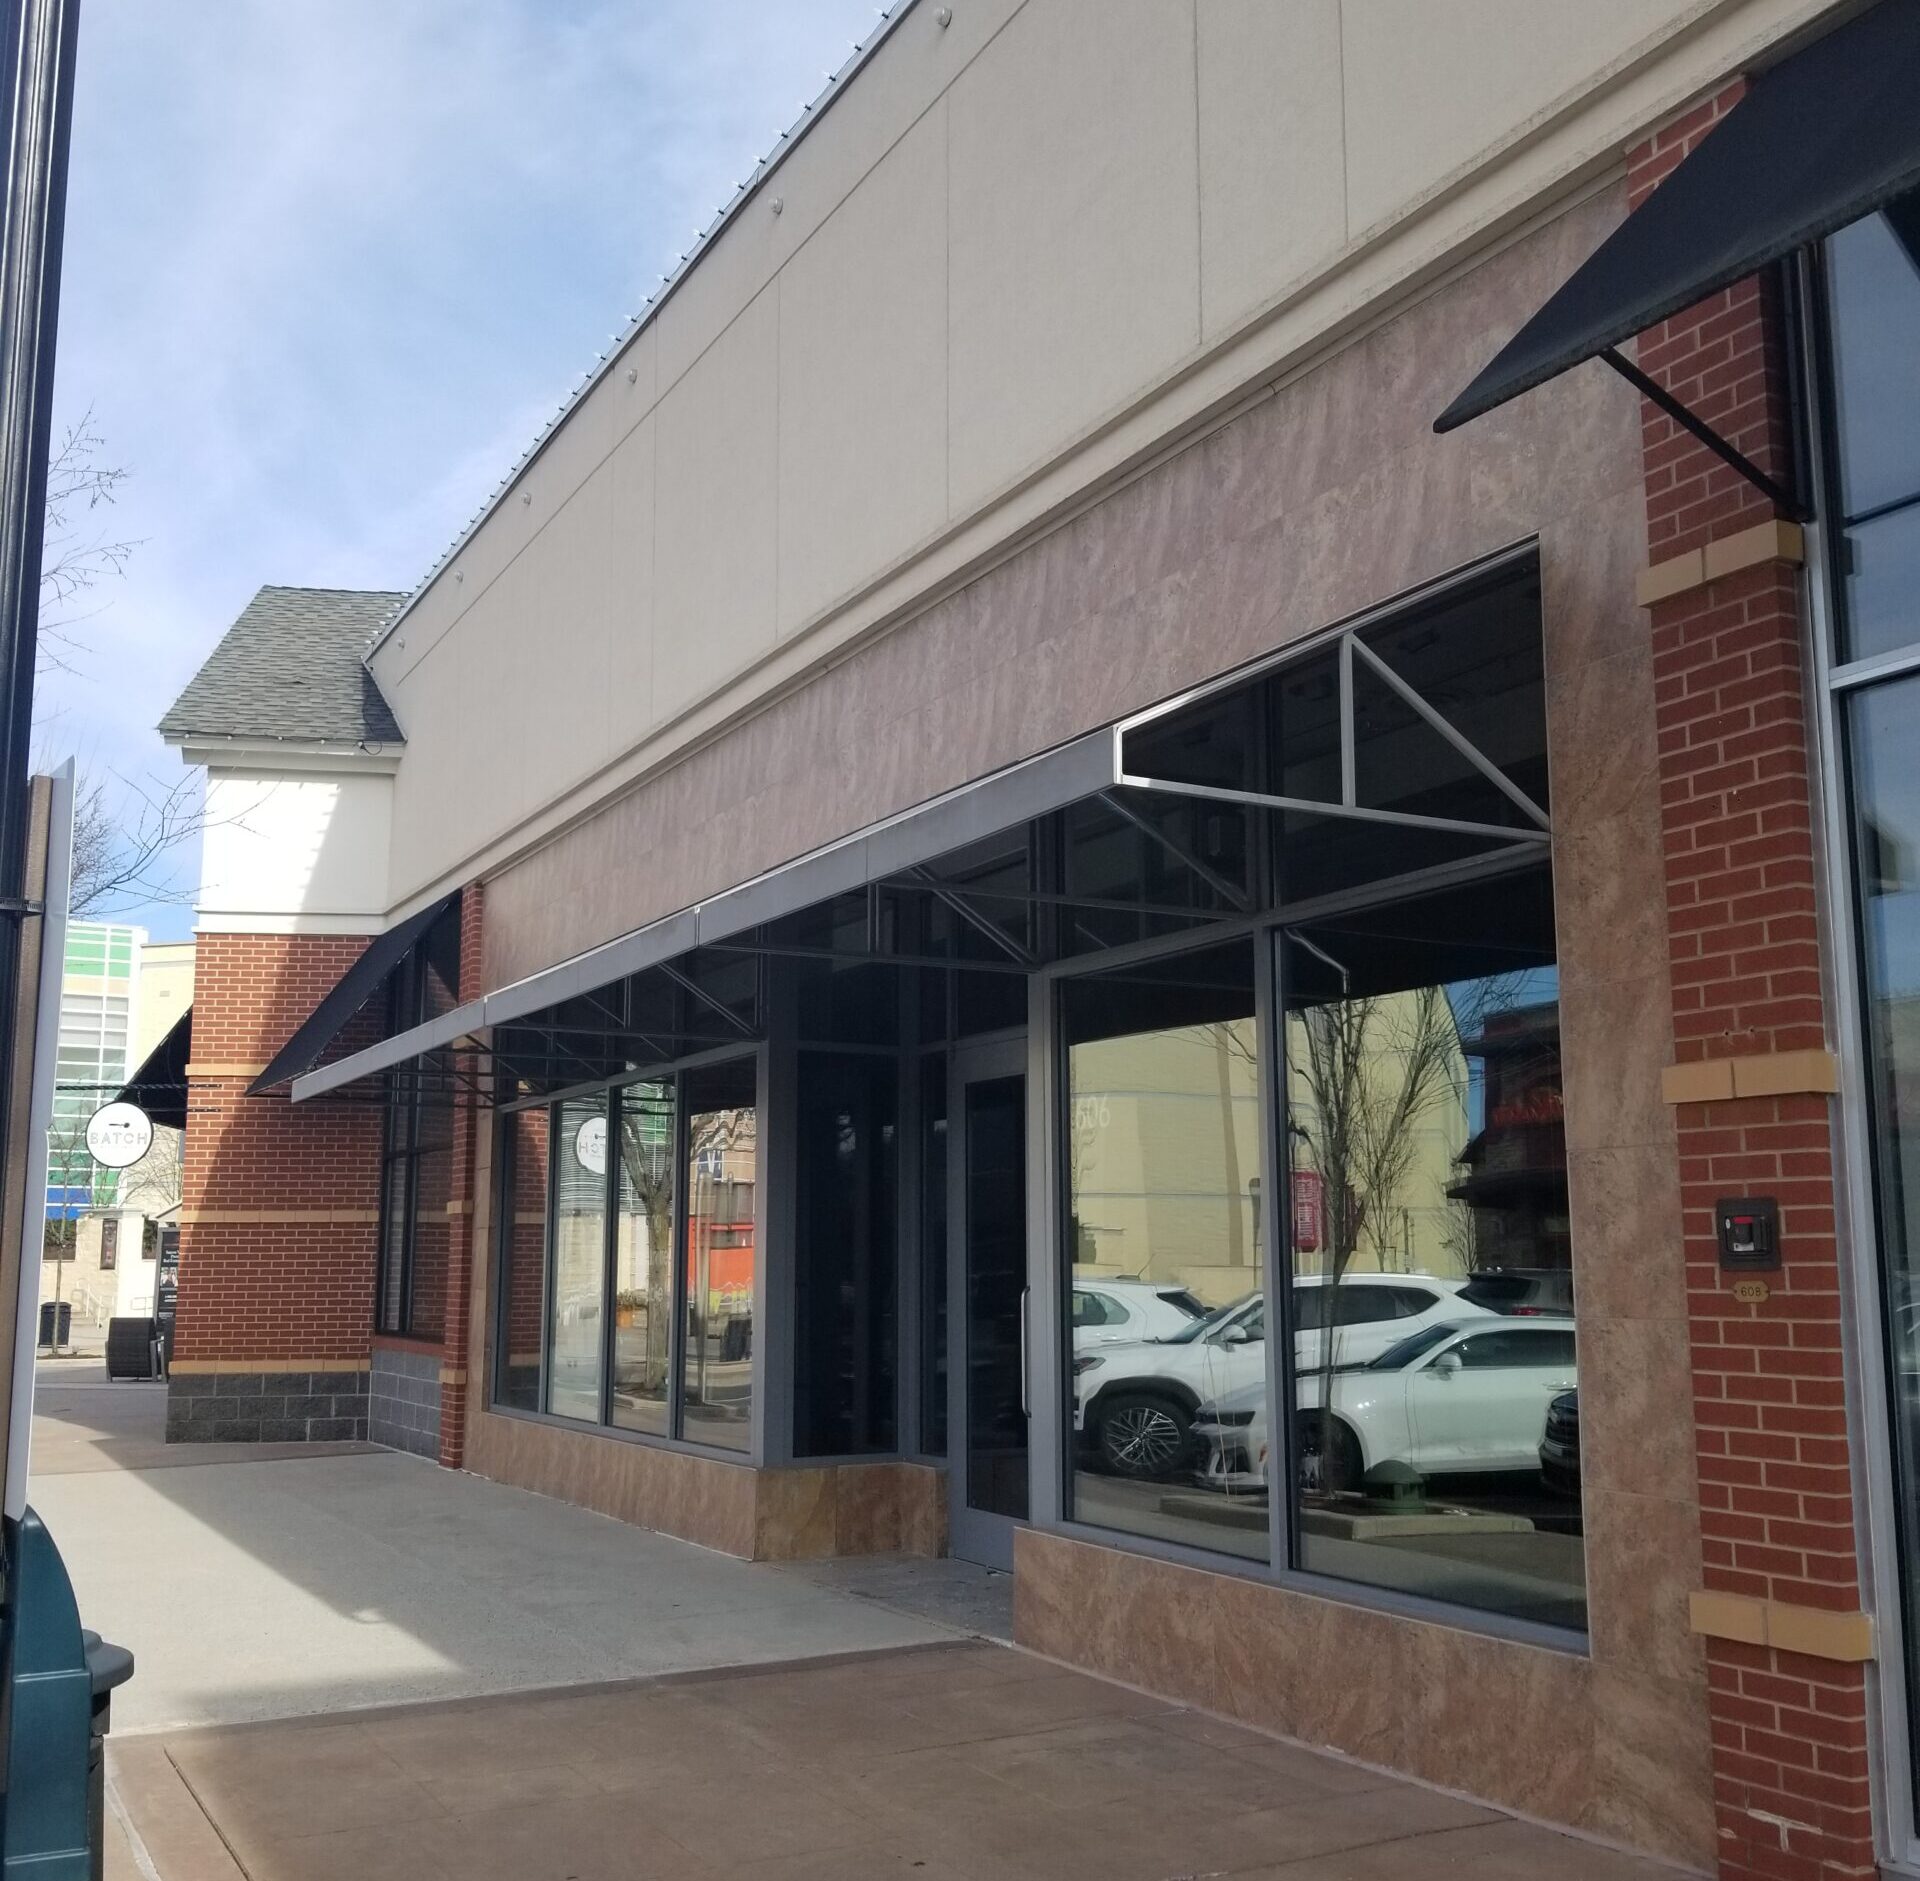 Retail Space Next to New Ice Cream Shop: What Should Go There? - Saucon ...